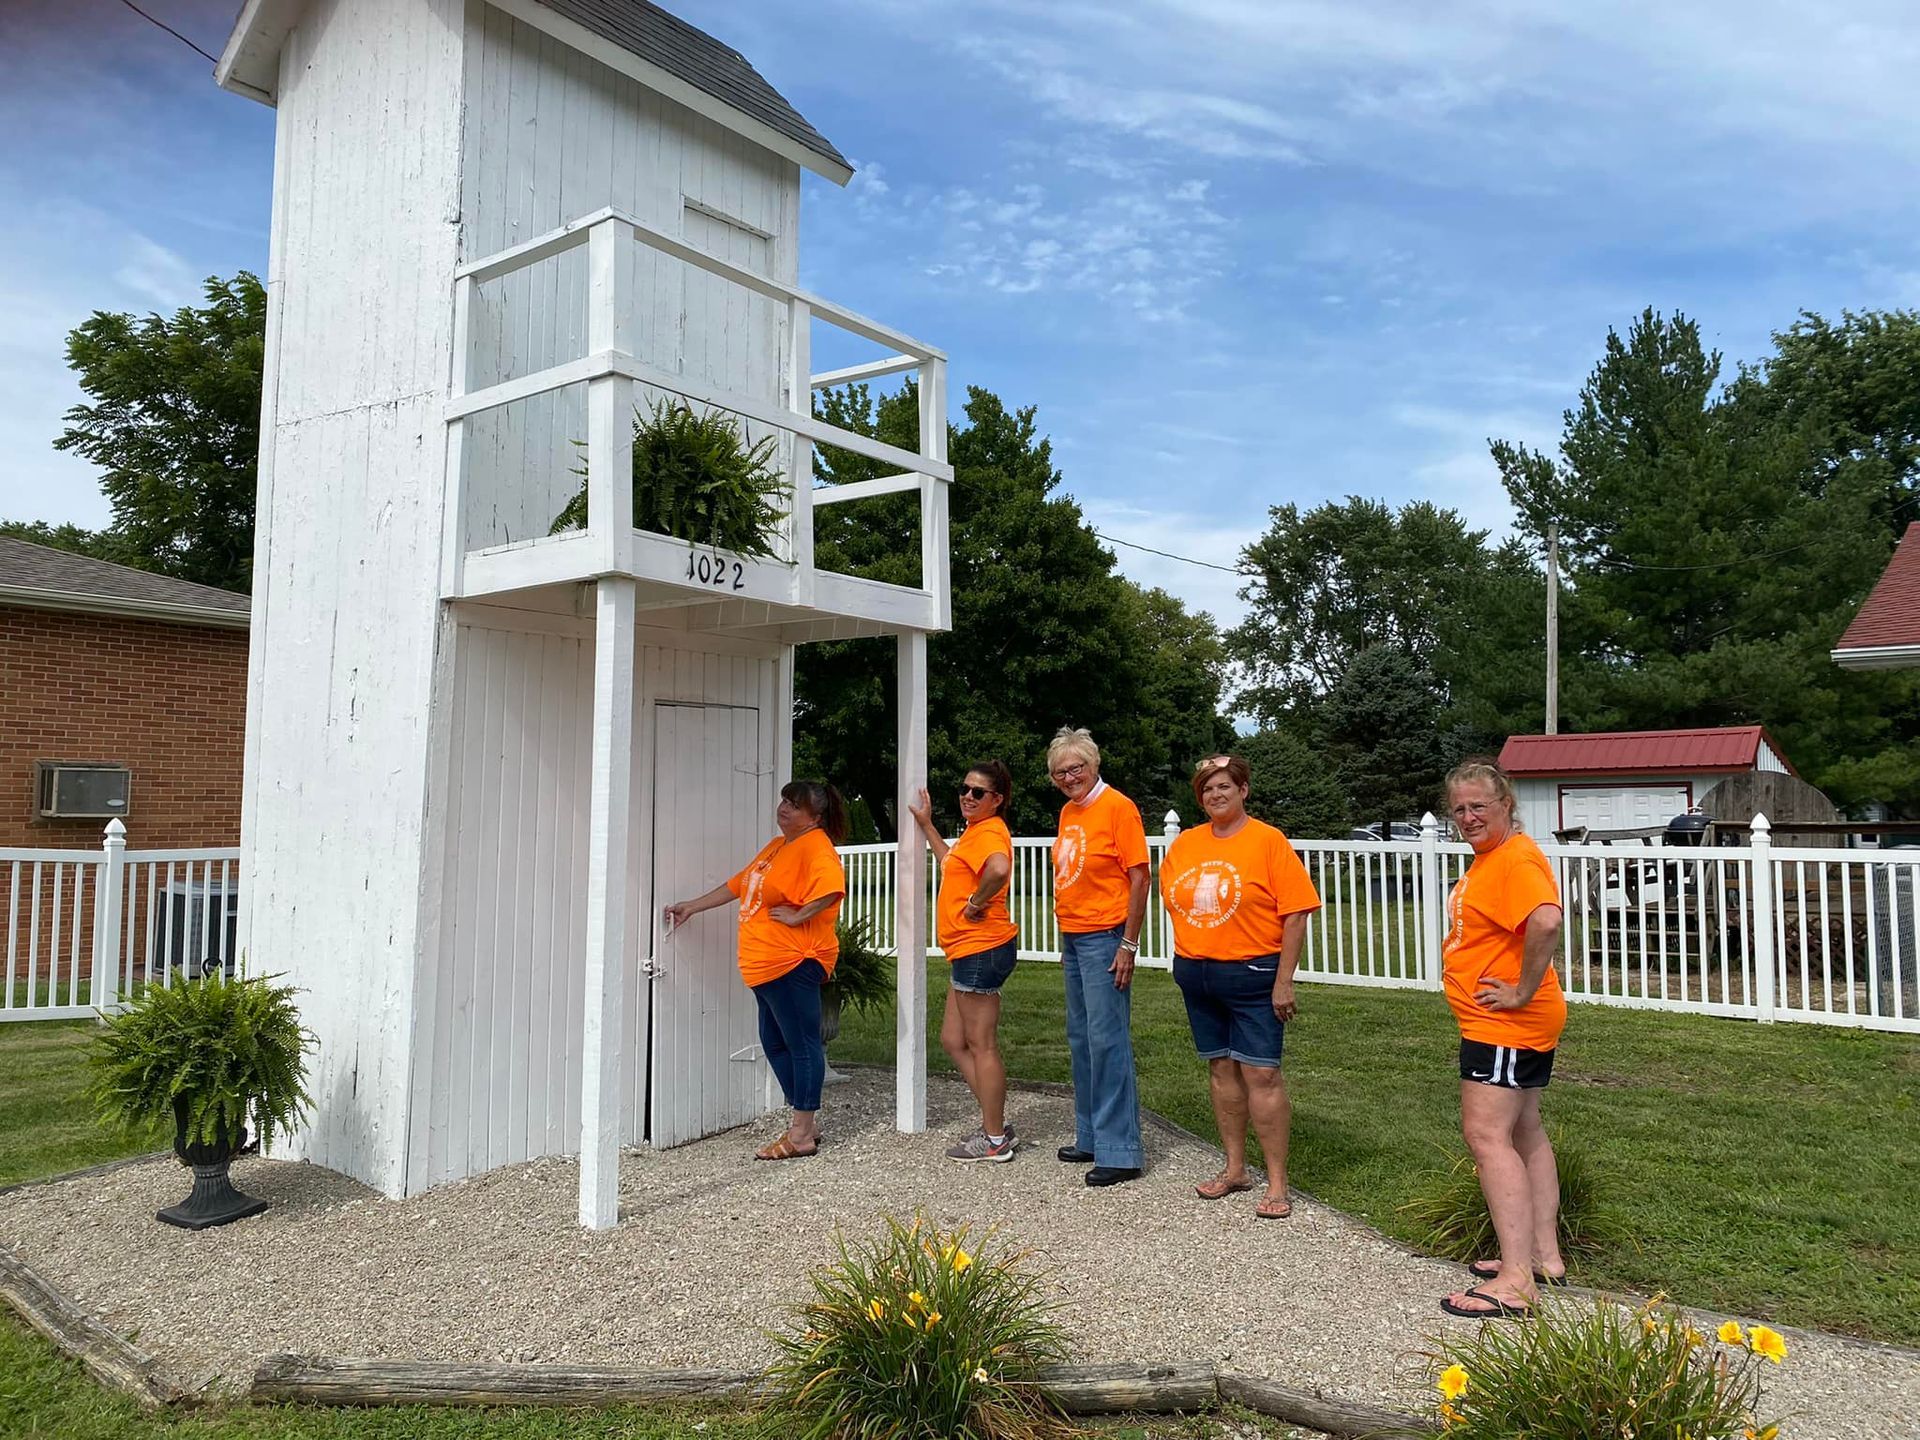 
World's First Two-Story Outhouse, world record in Gays, Illinois